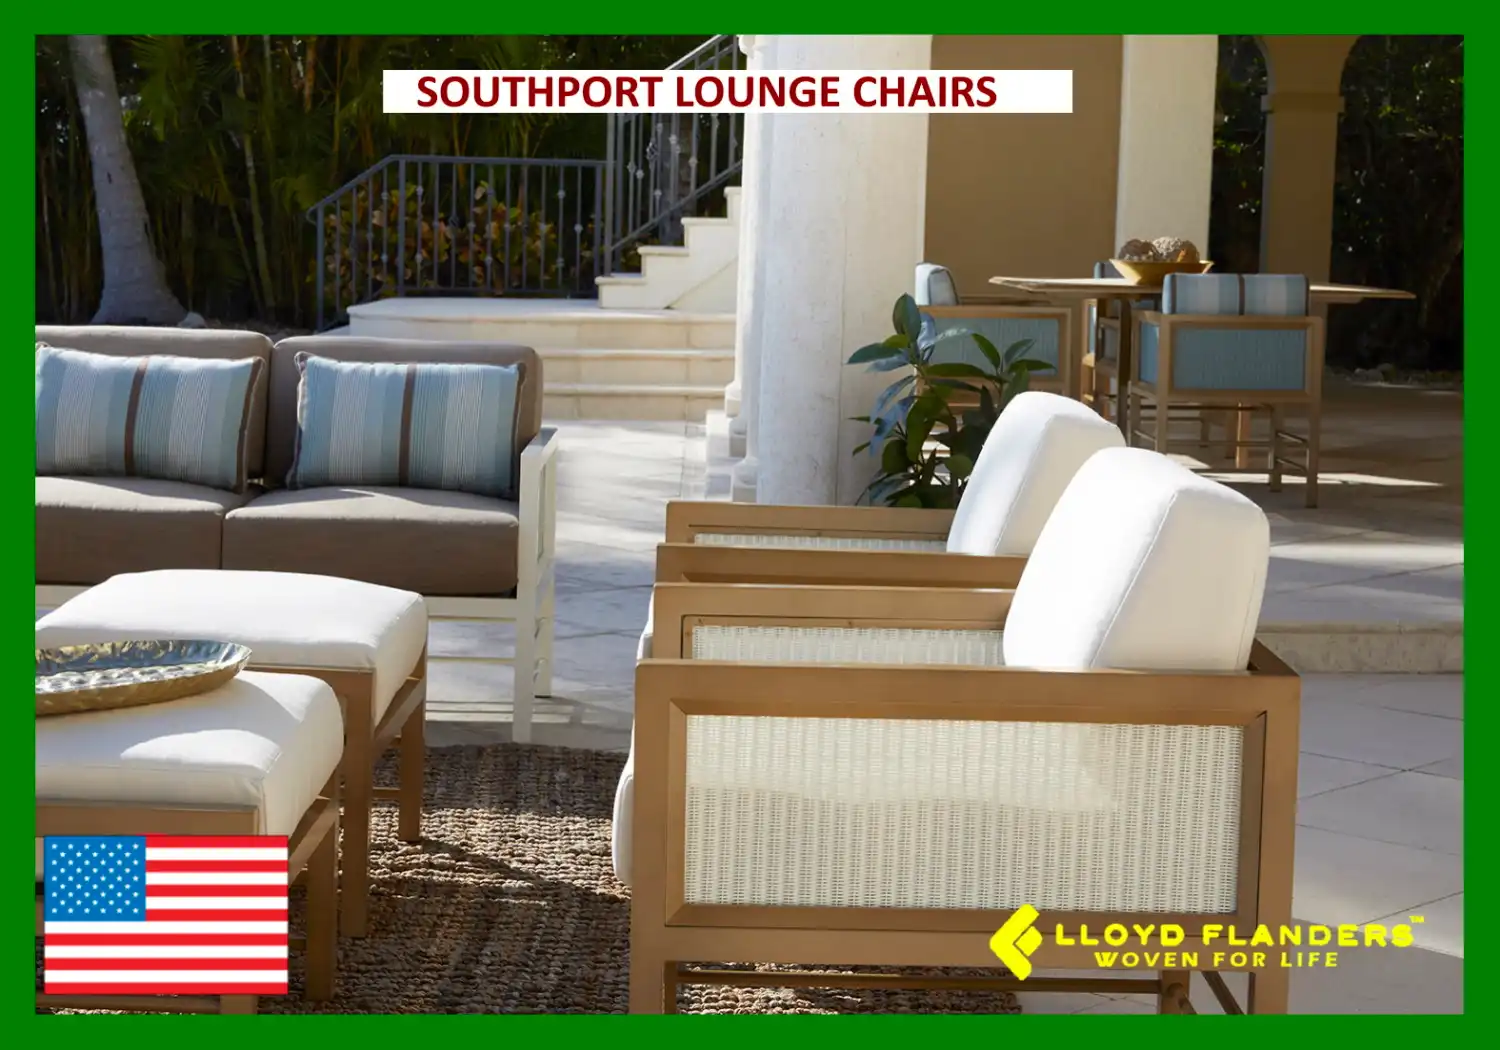 SOUTHPORT LOUNGE CHAIRS